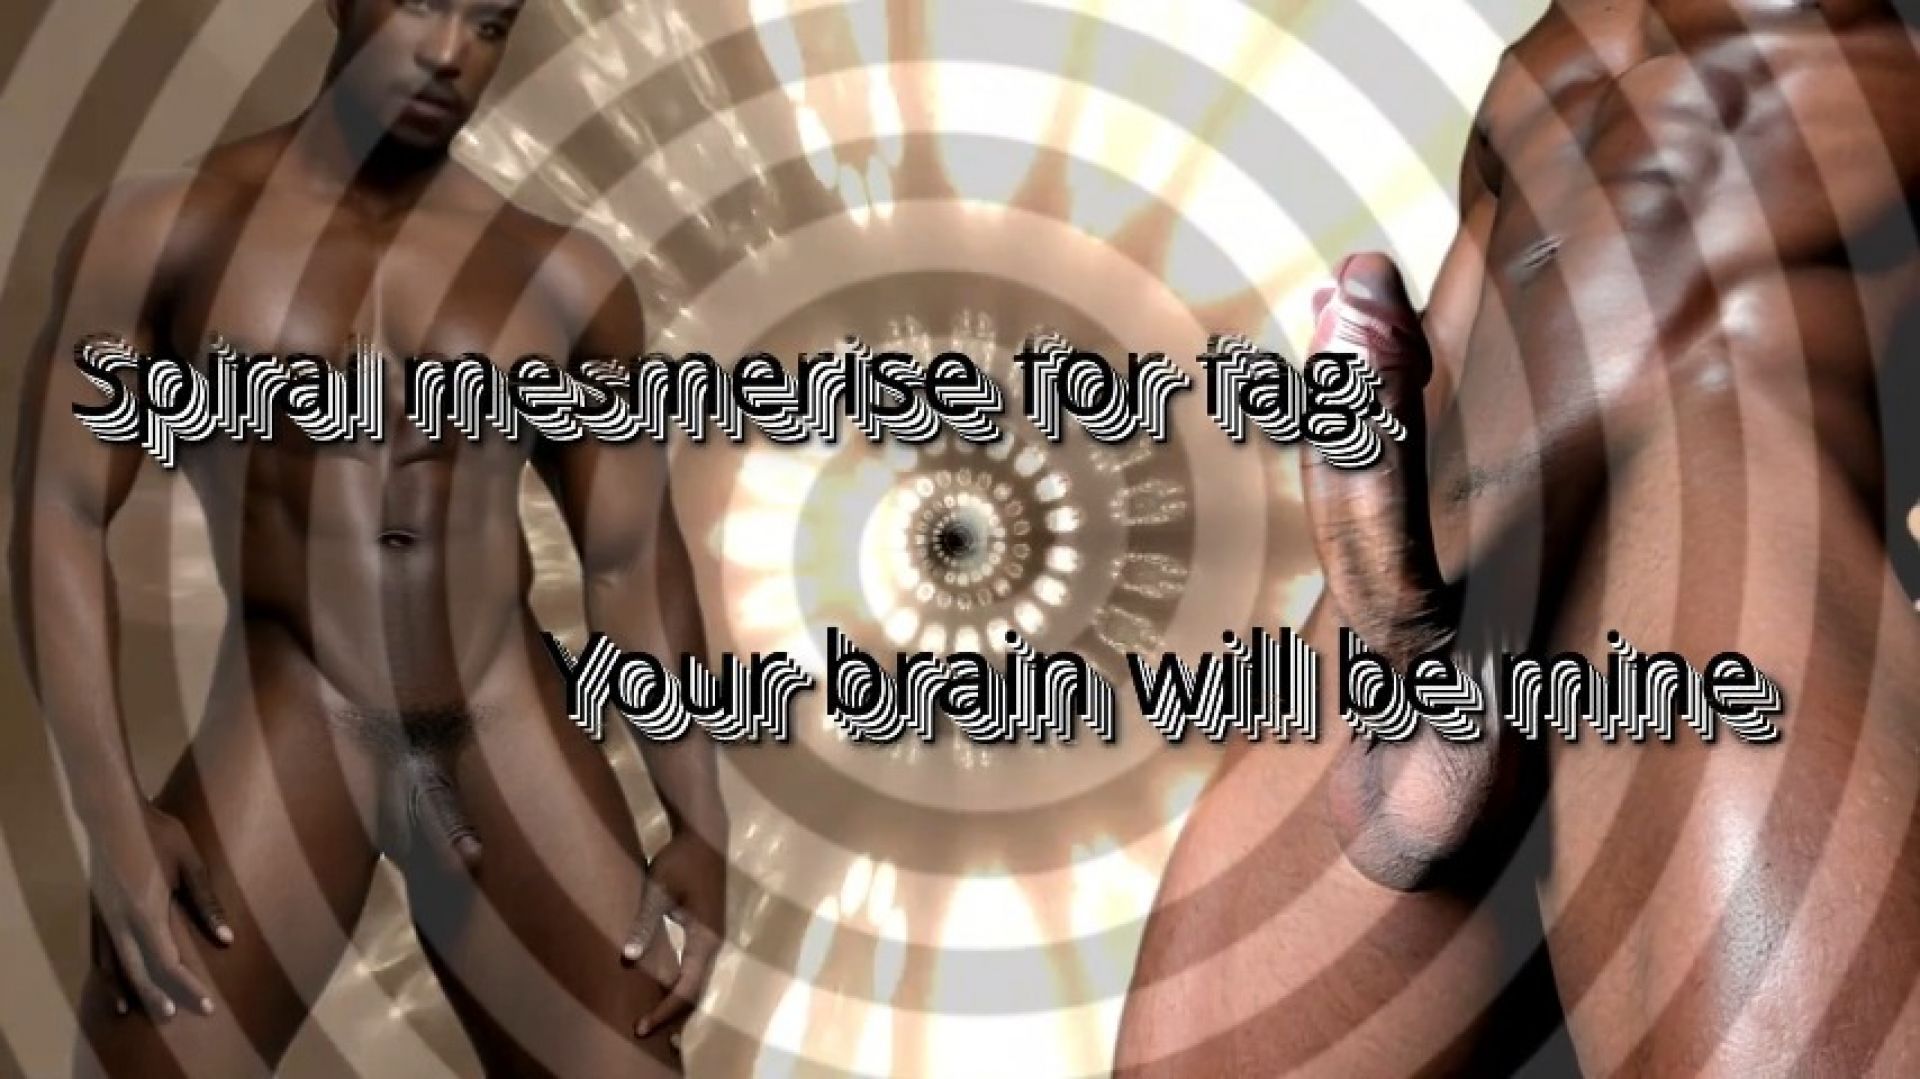 Spiral mesmerise for fag. Your brain will be mine